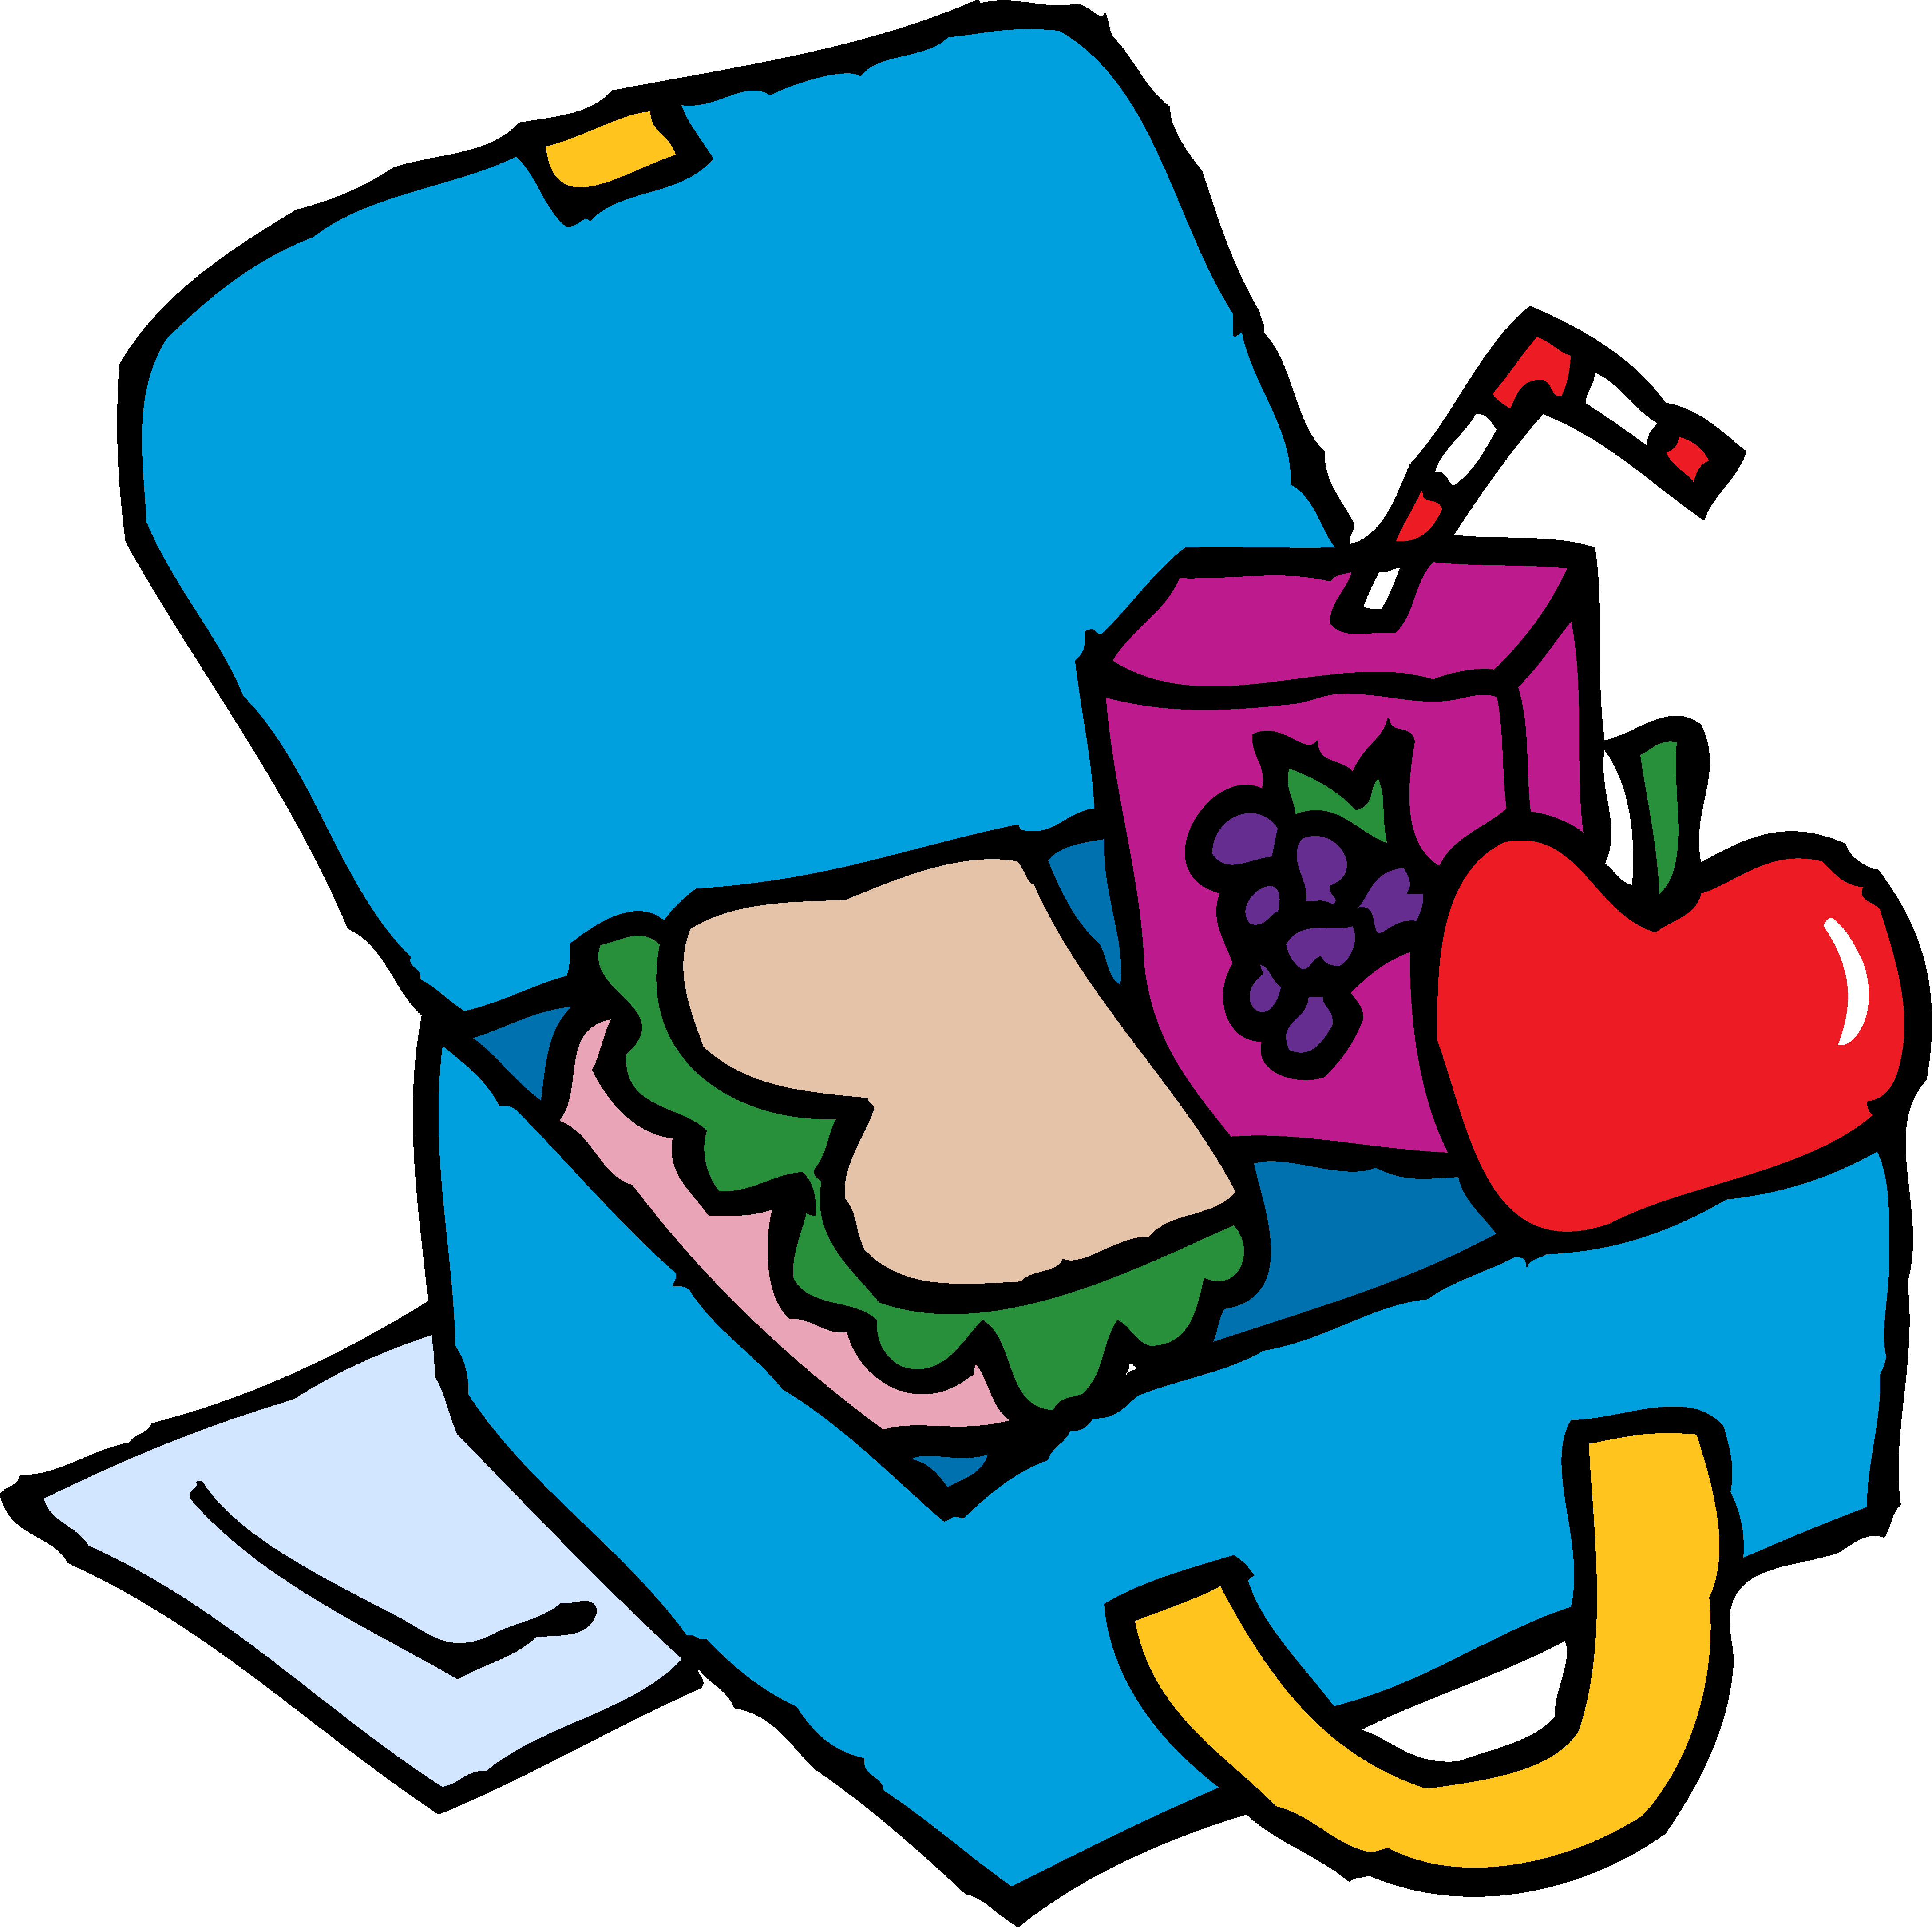 Lunchbox clipart bagged lunch. Bento box of the